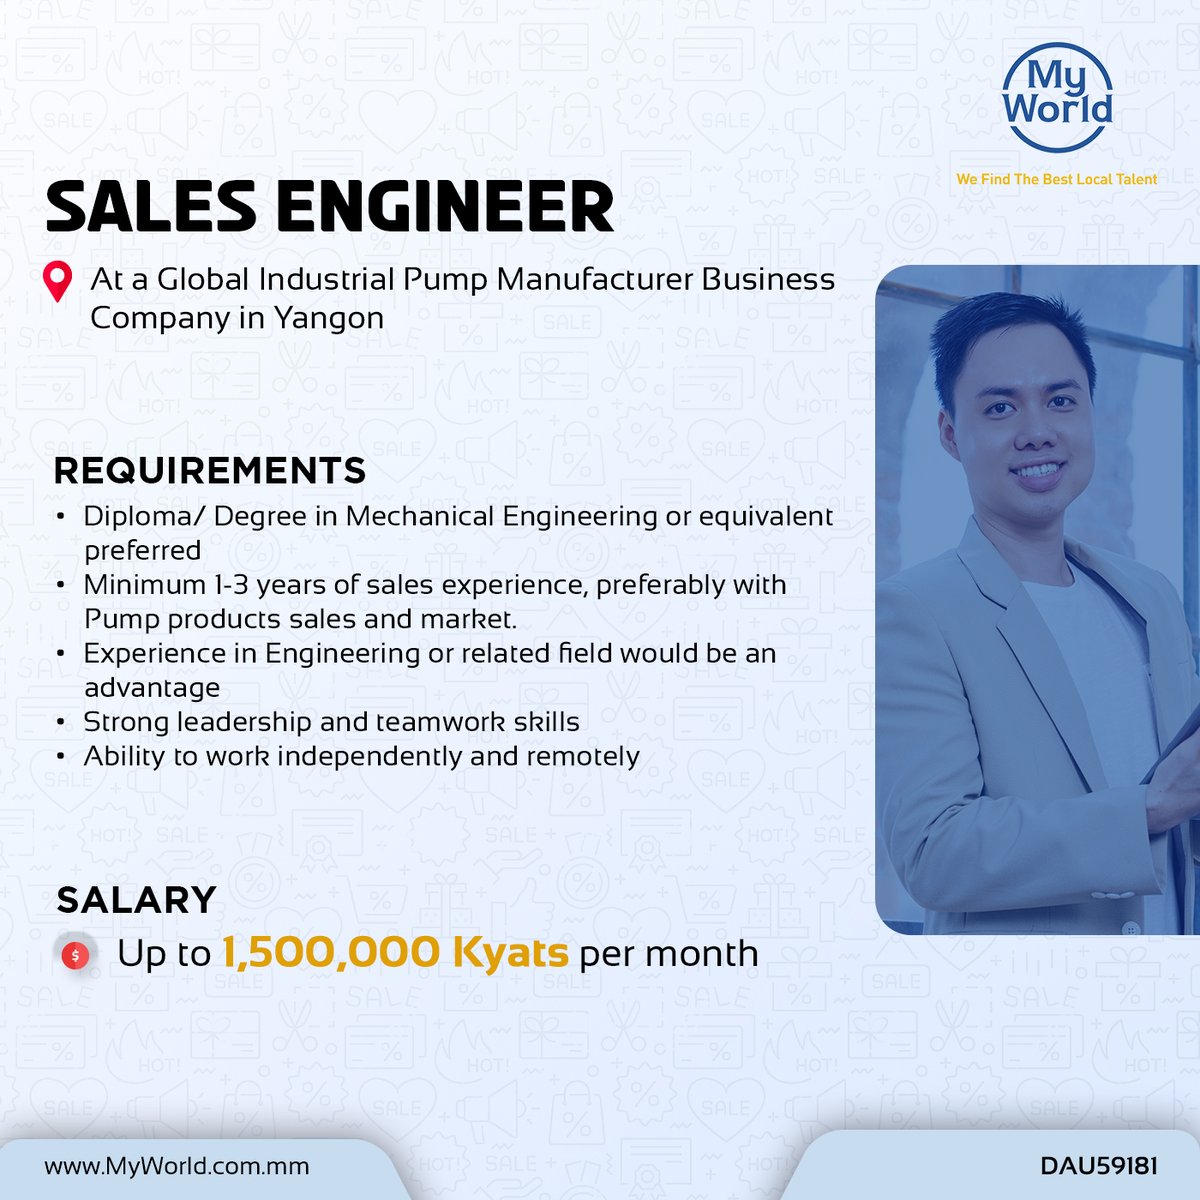 #Hiring in #Yangon

Position - #SalesEngineer at a Global Industrial Pump Manufacturer Business Company
Salary - Up to 1,500,000 Ks
#Job Link - tinyurl.com/2pprxzhs

Email - support@myworld.com.mm

#vacancies #jobs #JobOpportunity